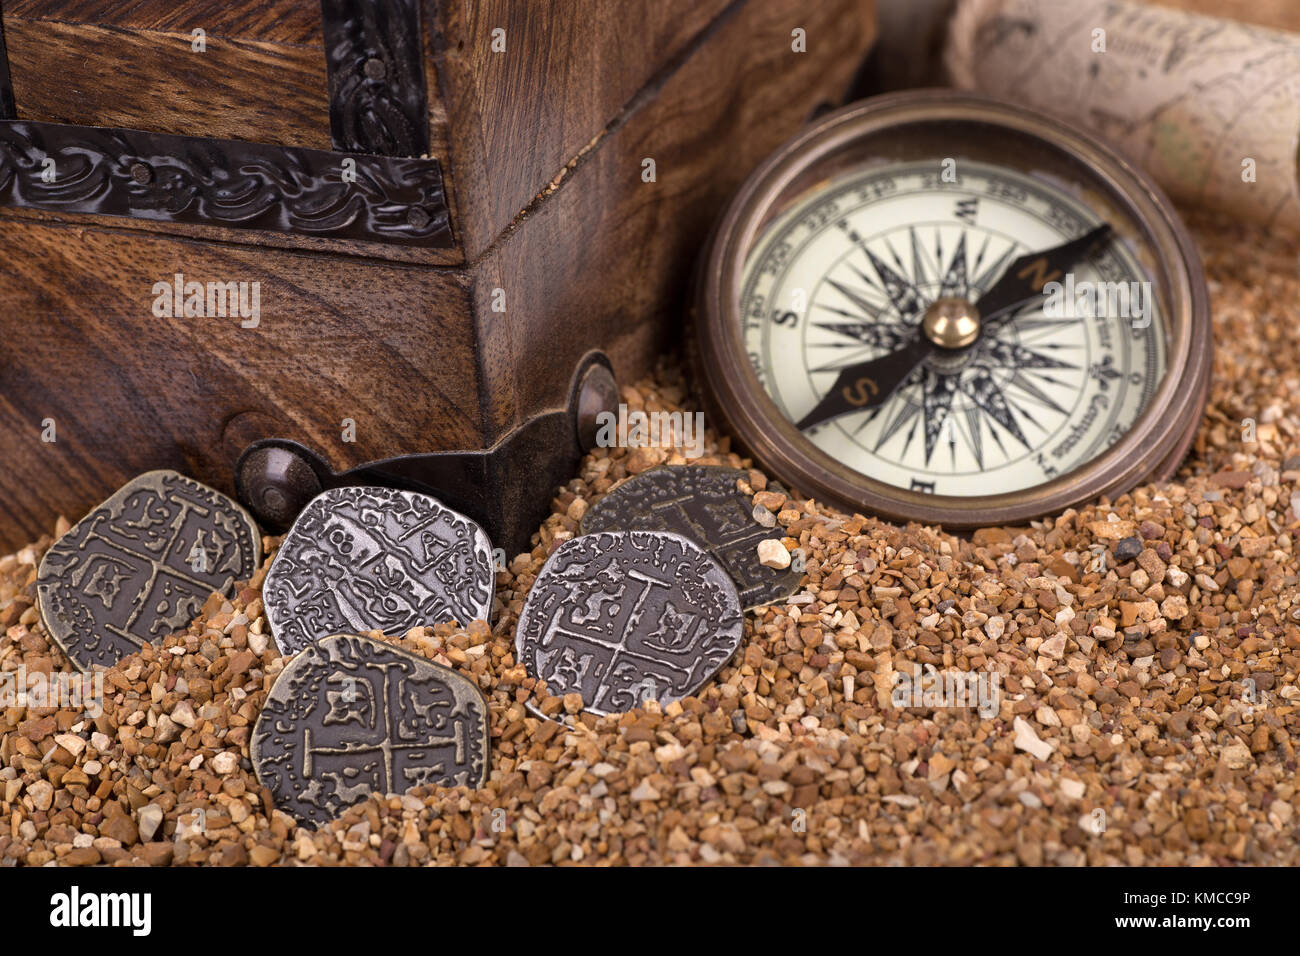 Travel Accessories Scroll Compass Chess Treasure Trove Of Antique Maps  Stock Photo - Download Image Now - iStock